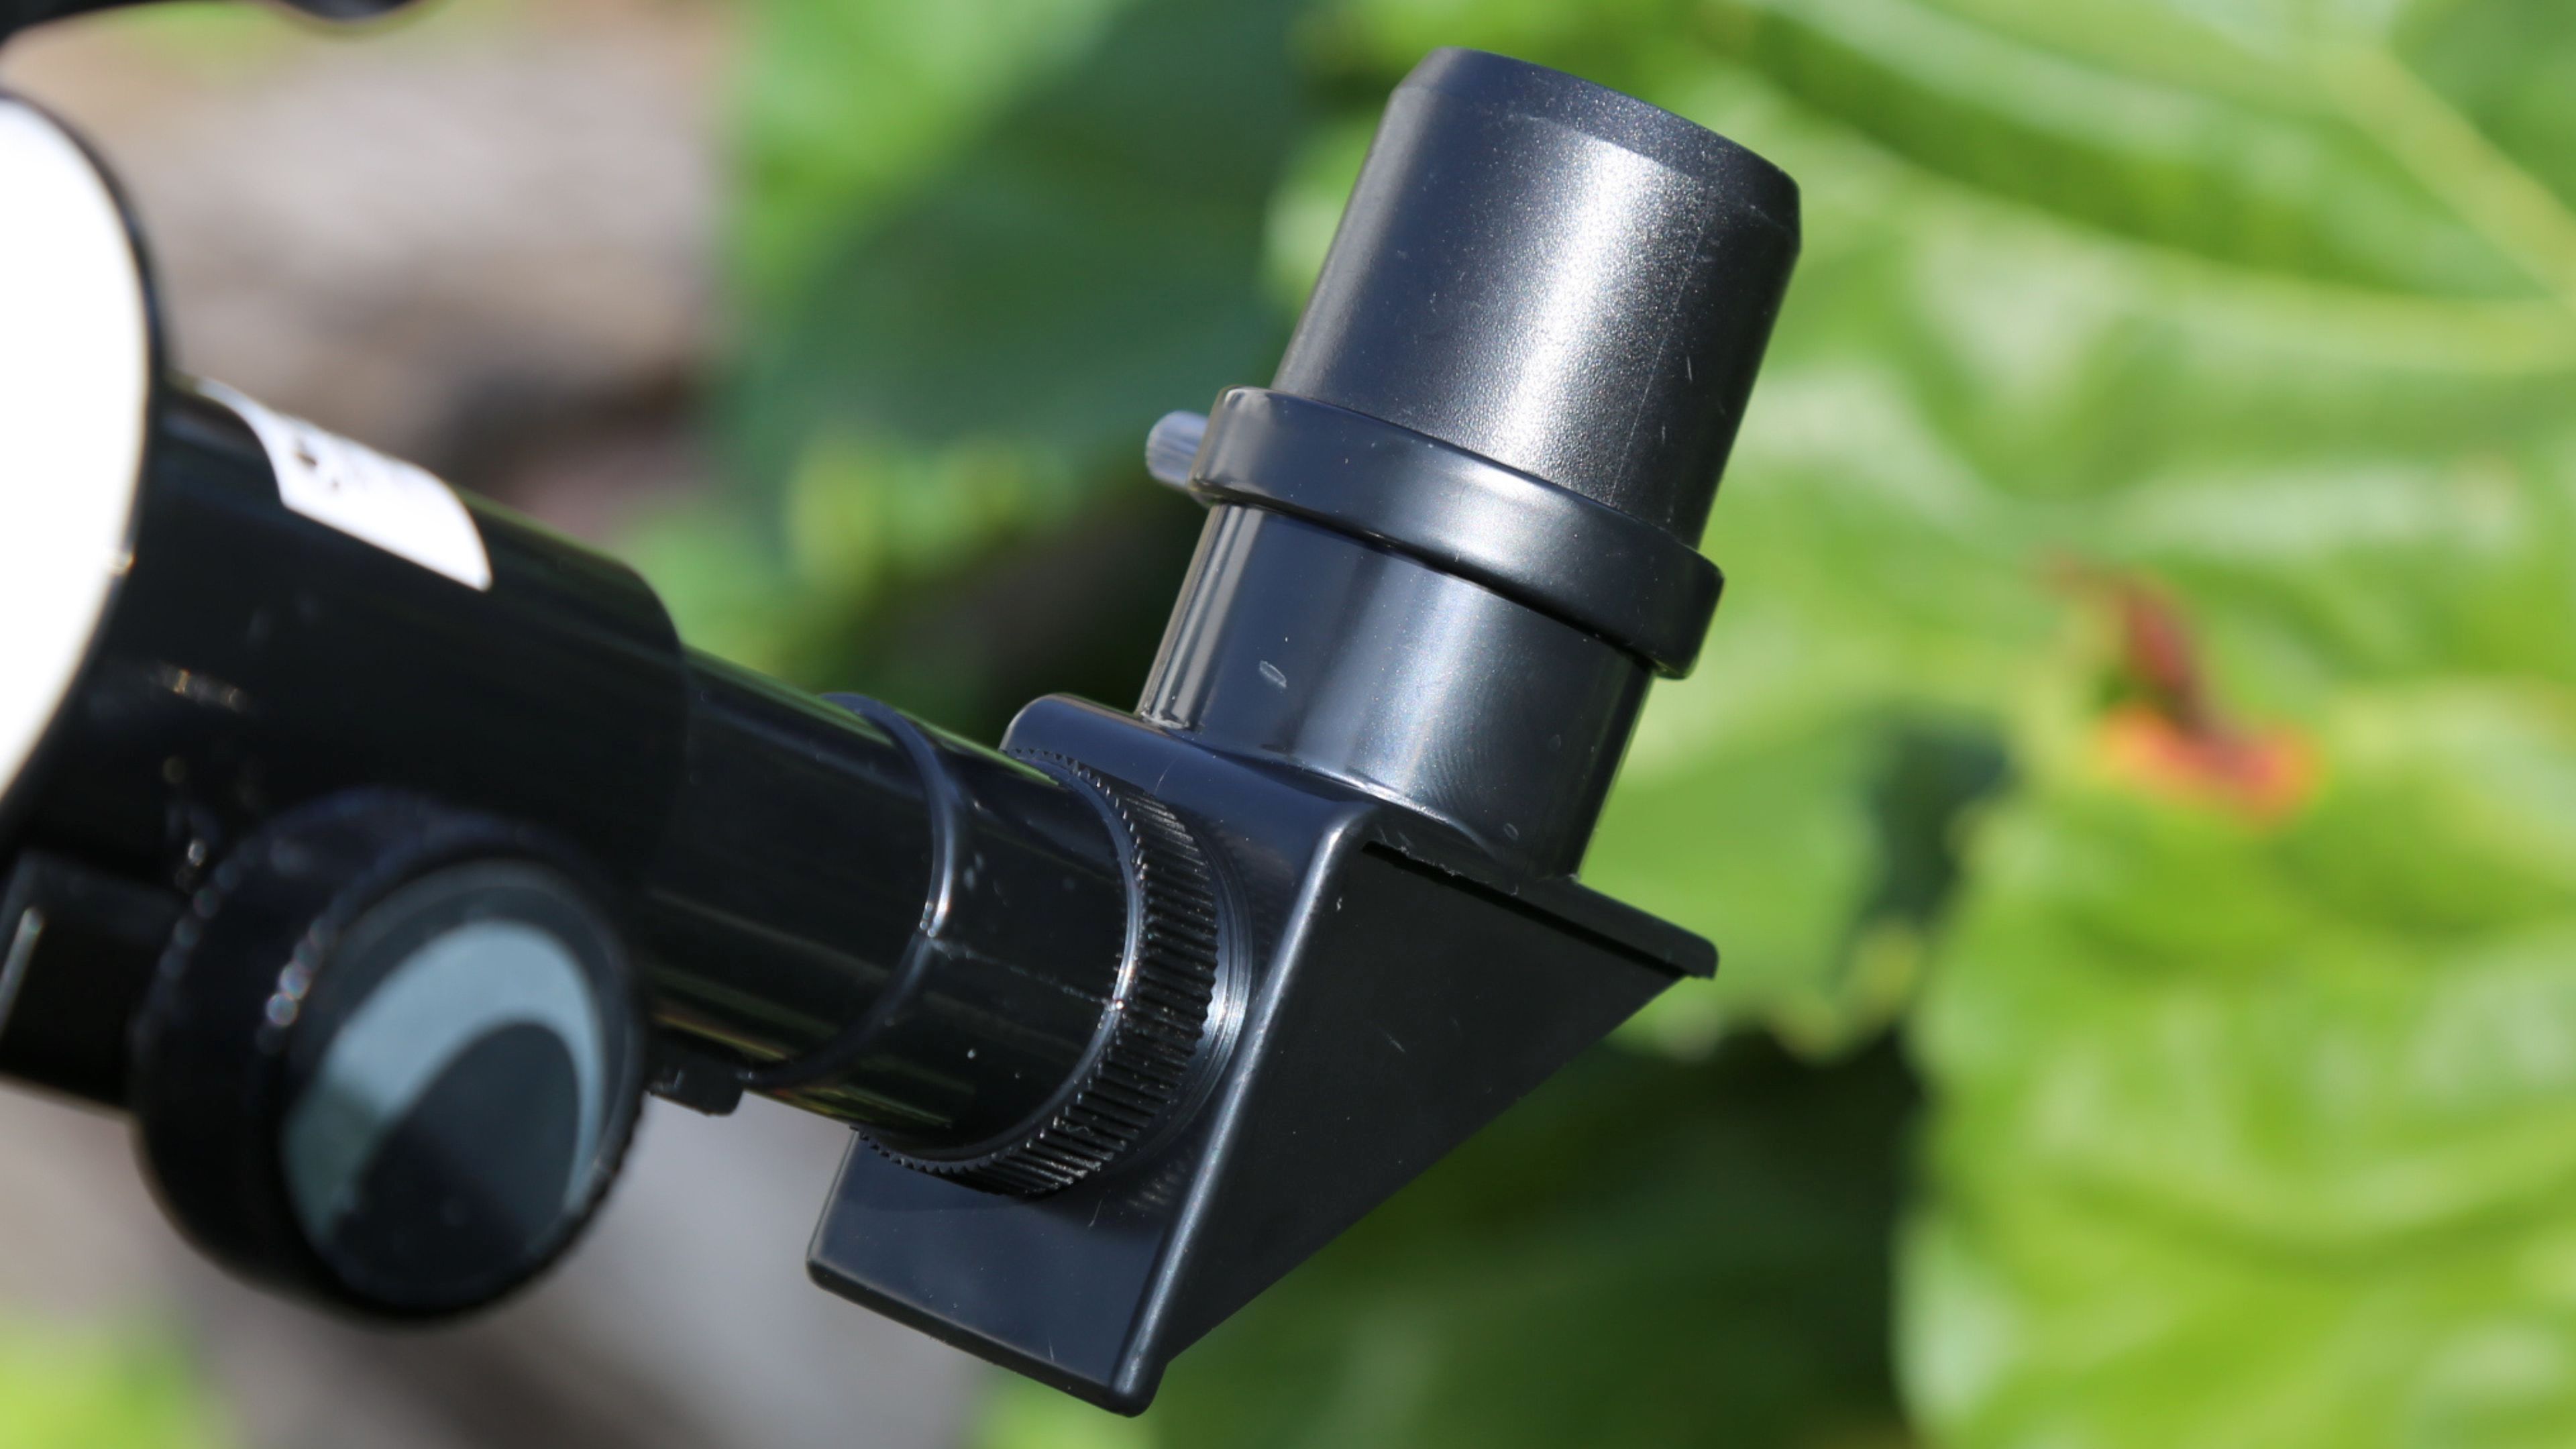 Right angle black telescope lens appears against blurred green leaf background.